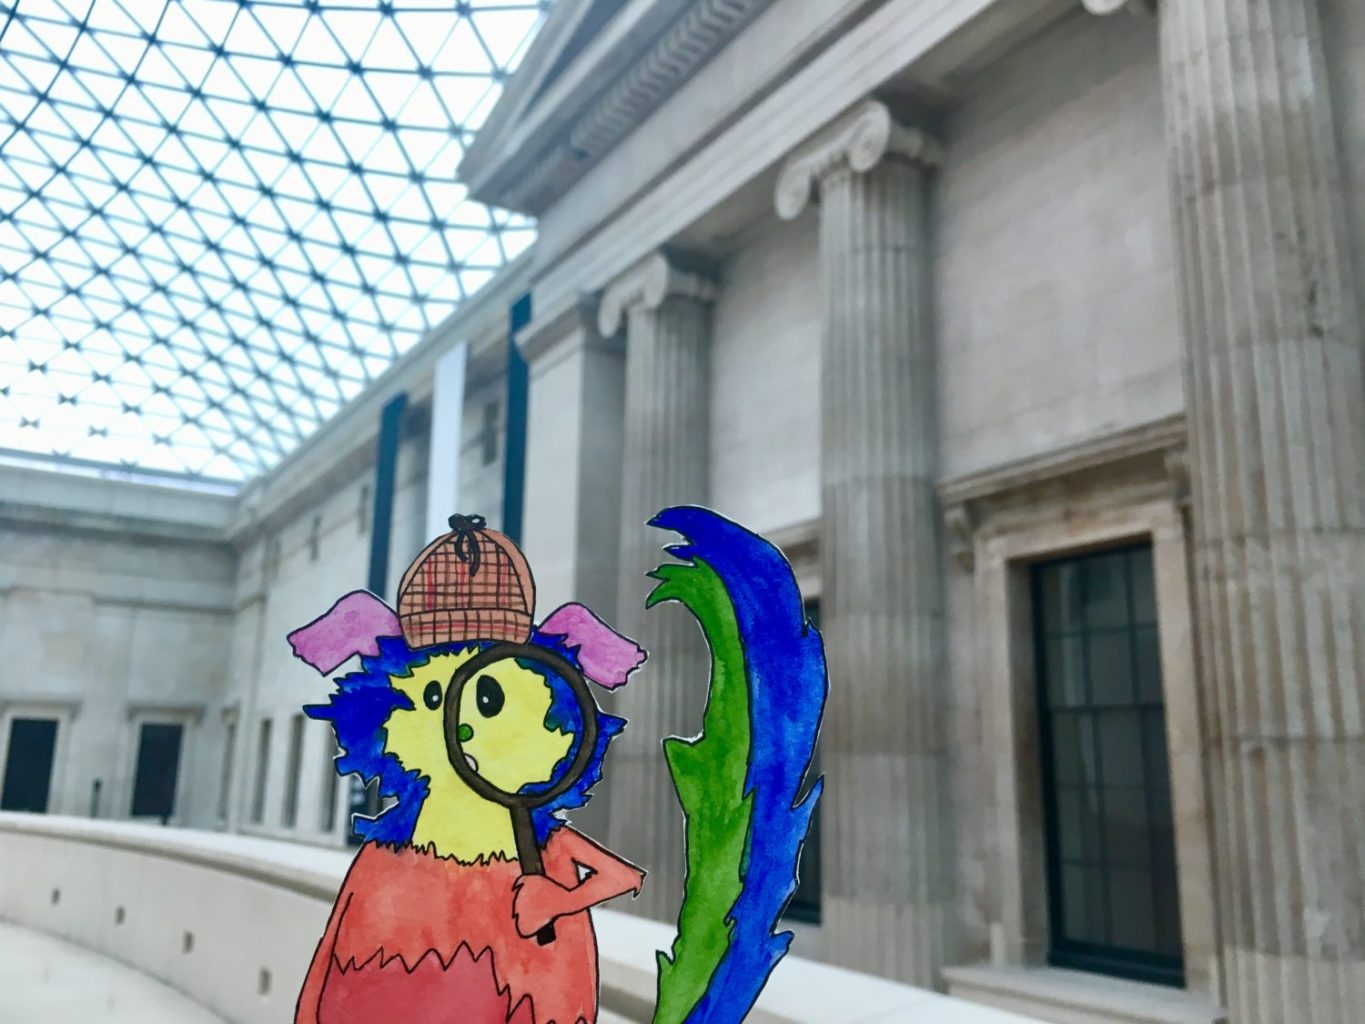 Marabou is posed inside of the British Museum in front of columns and under the glass ceiling. They hold a magnifying glass and wear a detective hat.